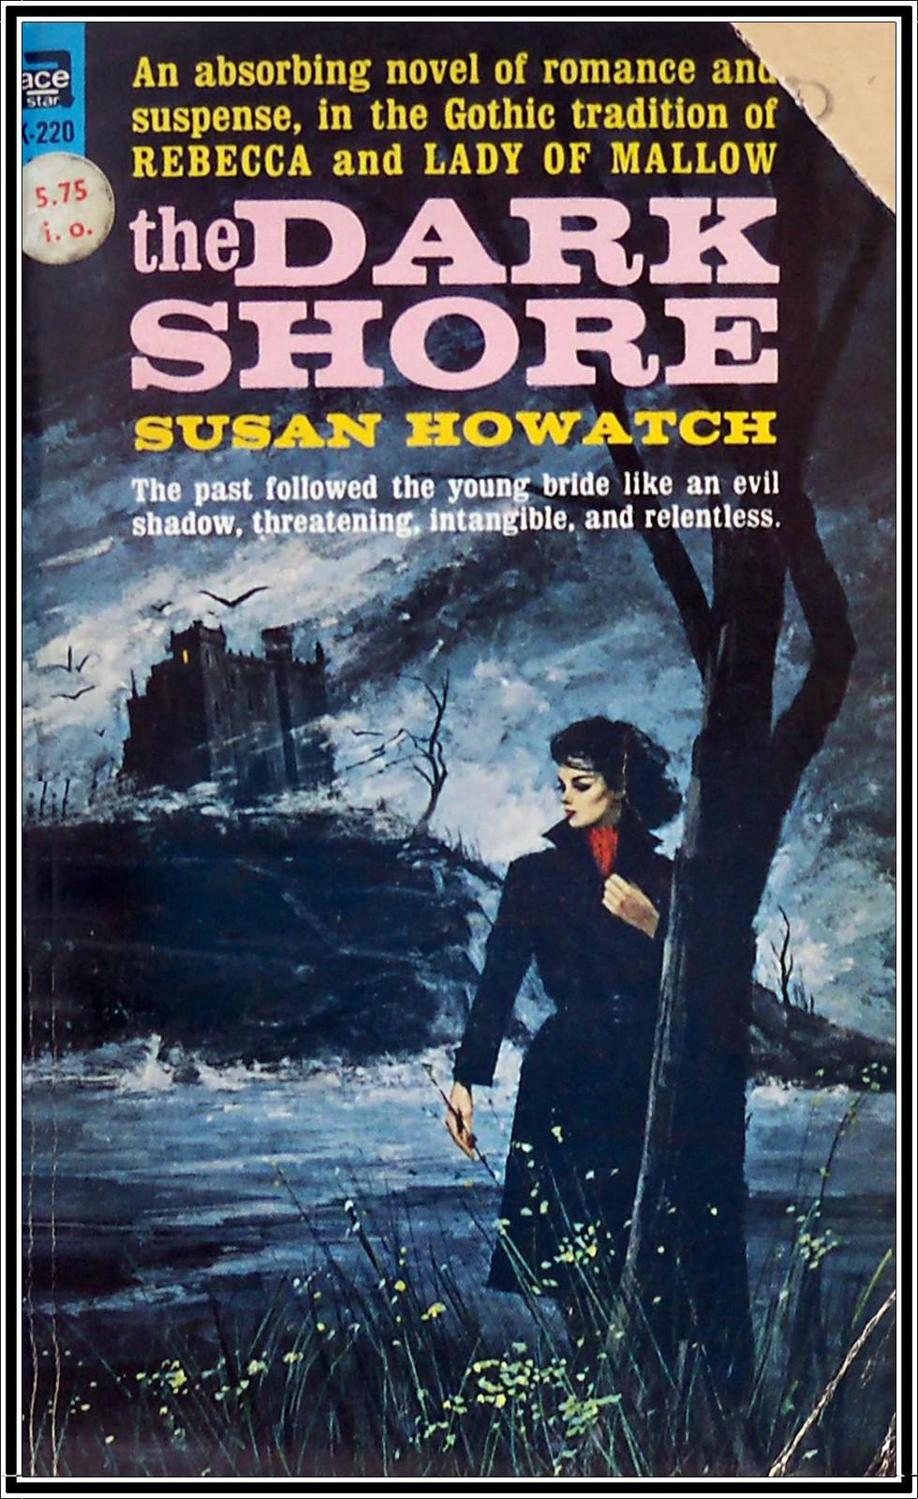 The Dark Shore by Susan Howatch